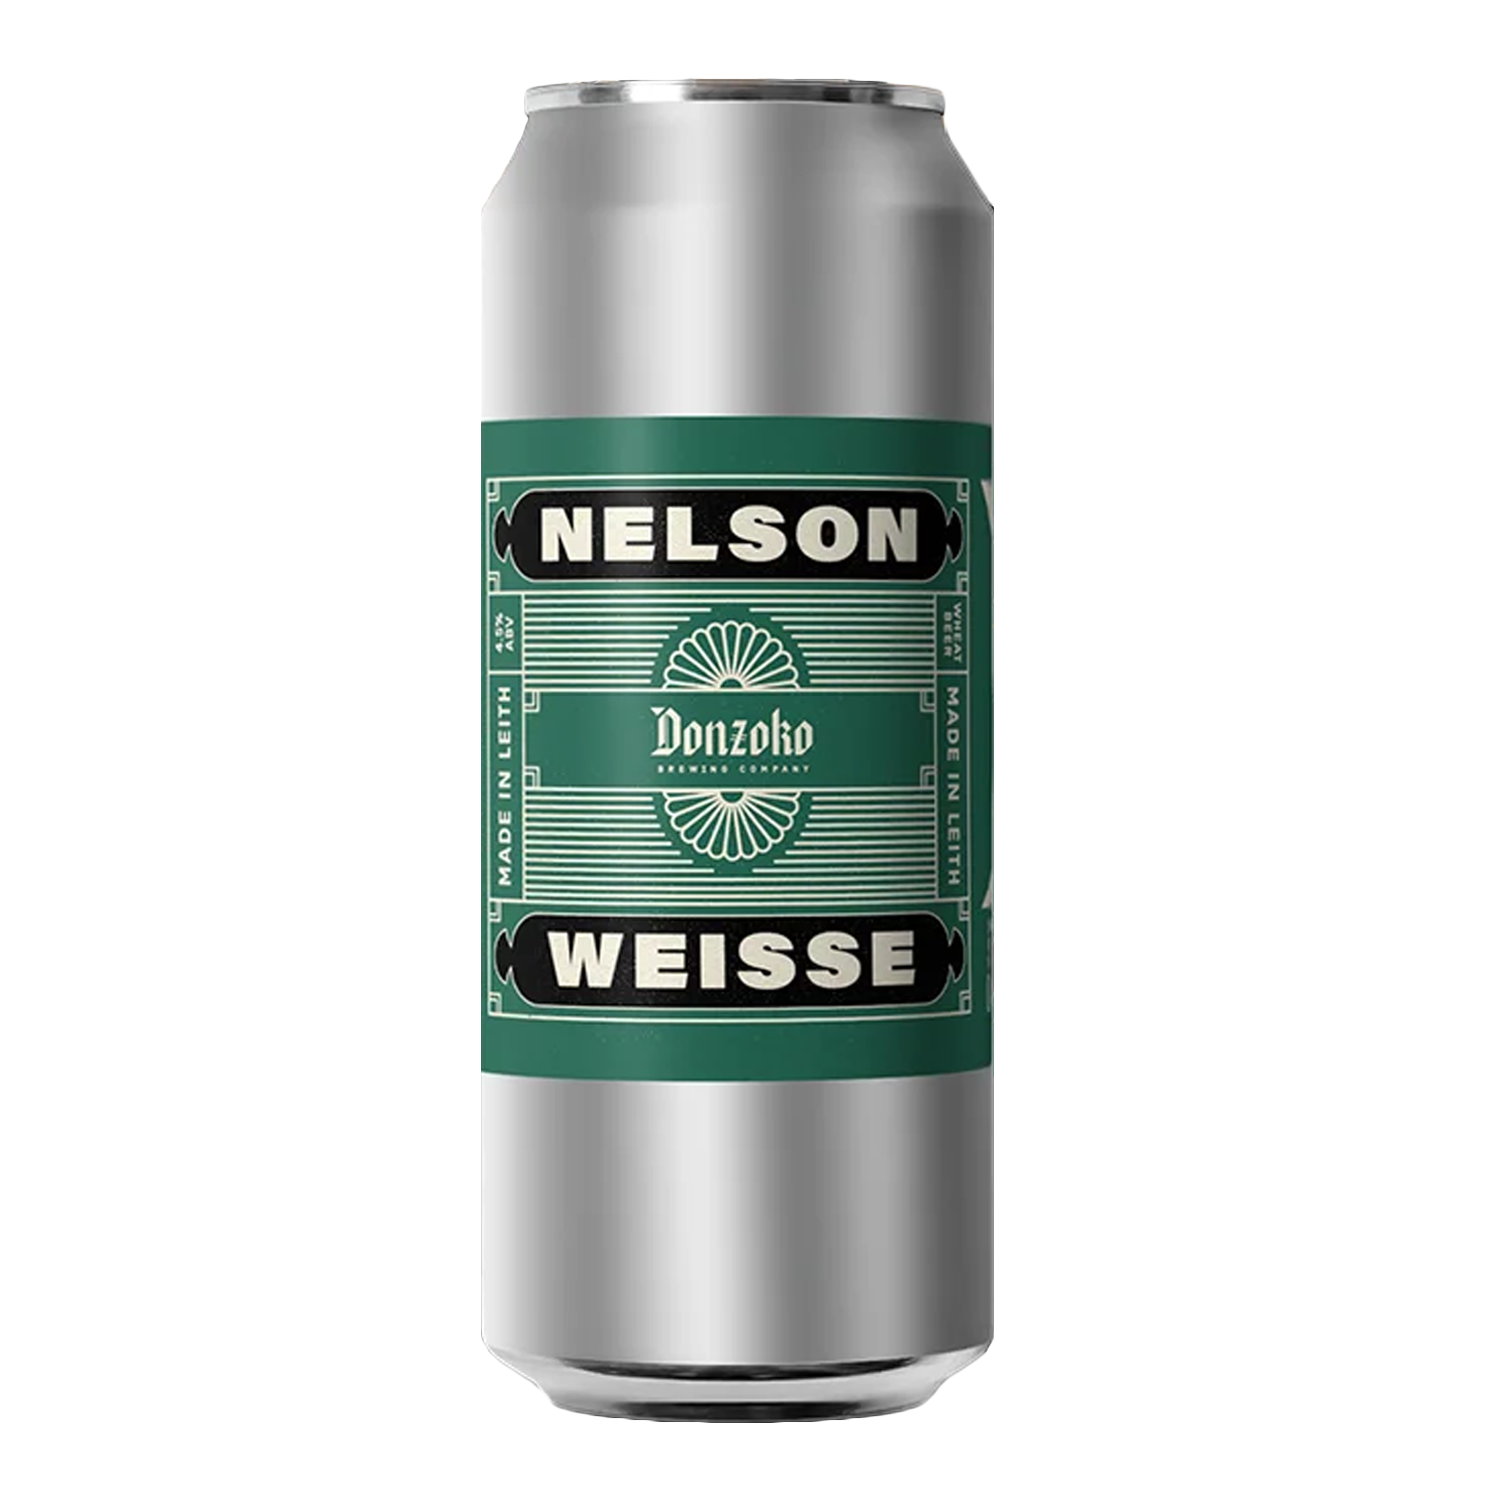 Donzoko Nelson Weisse Wheat Beer